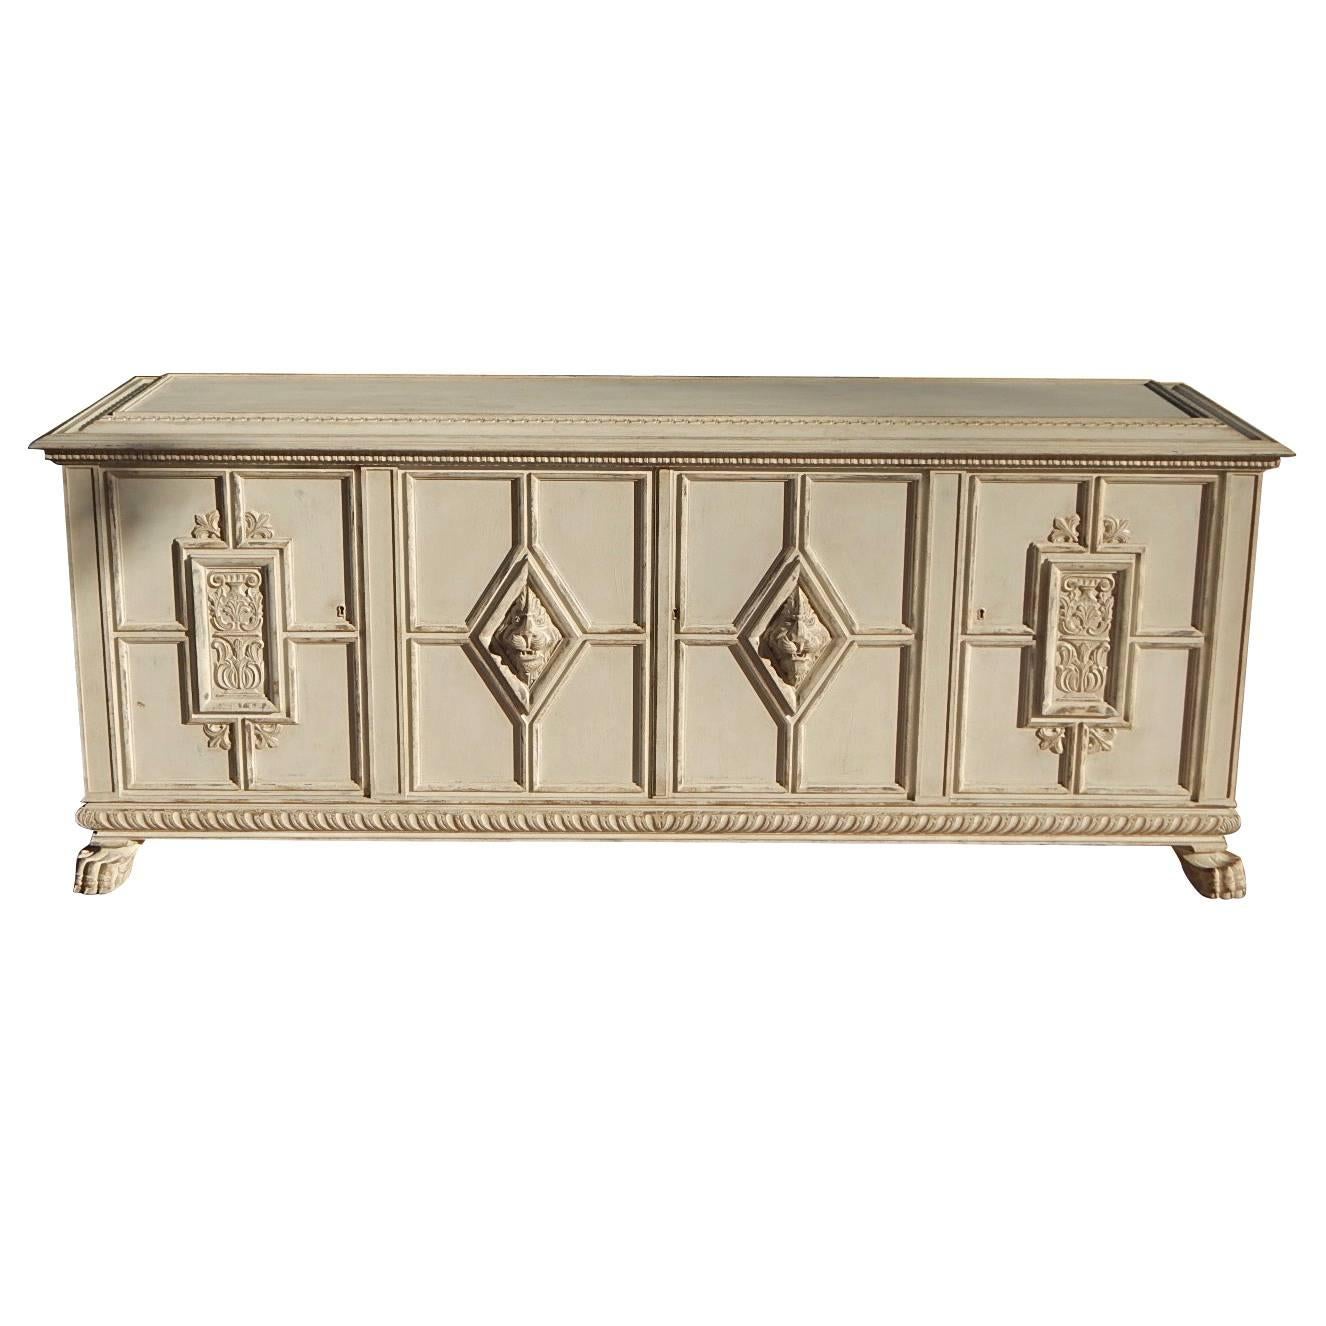 Swedish Neo-Gothic Storage Cabinet in Gustavian Painted Finish, circa 1920 For Sale